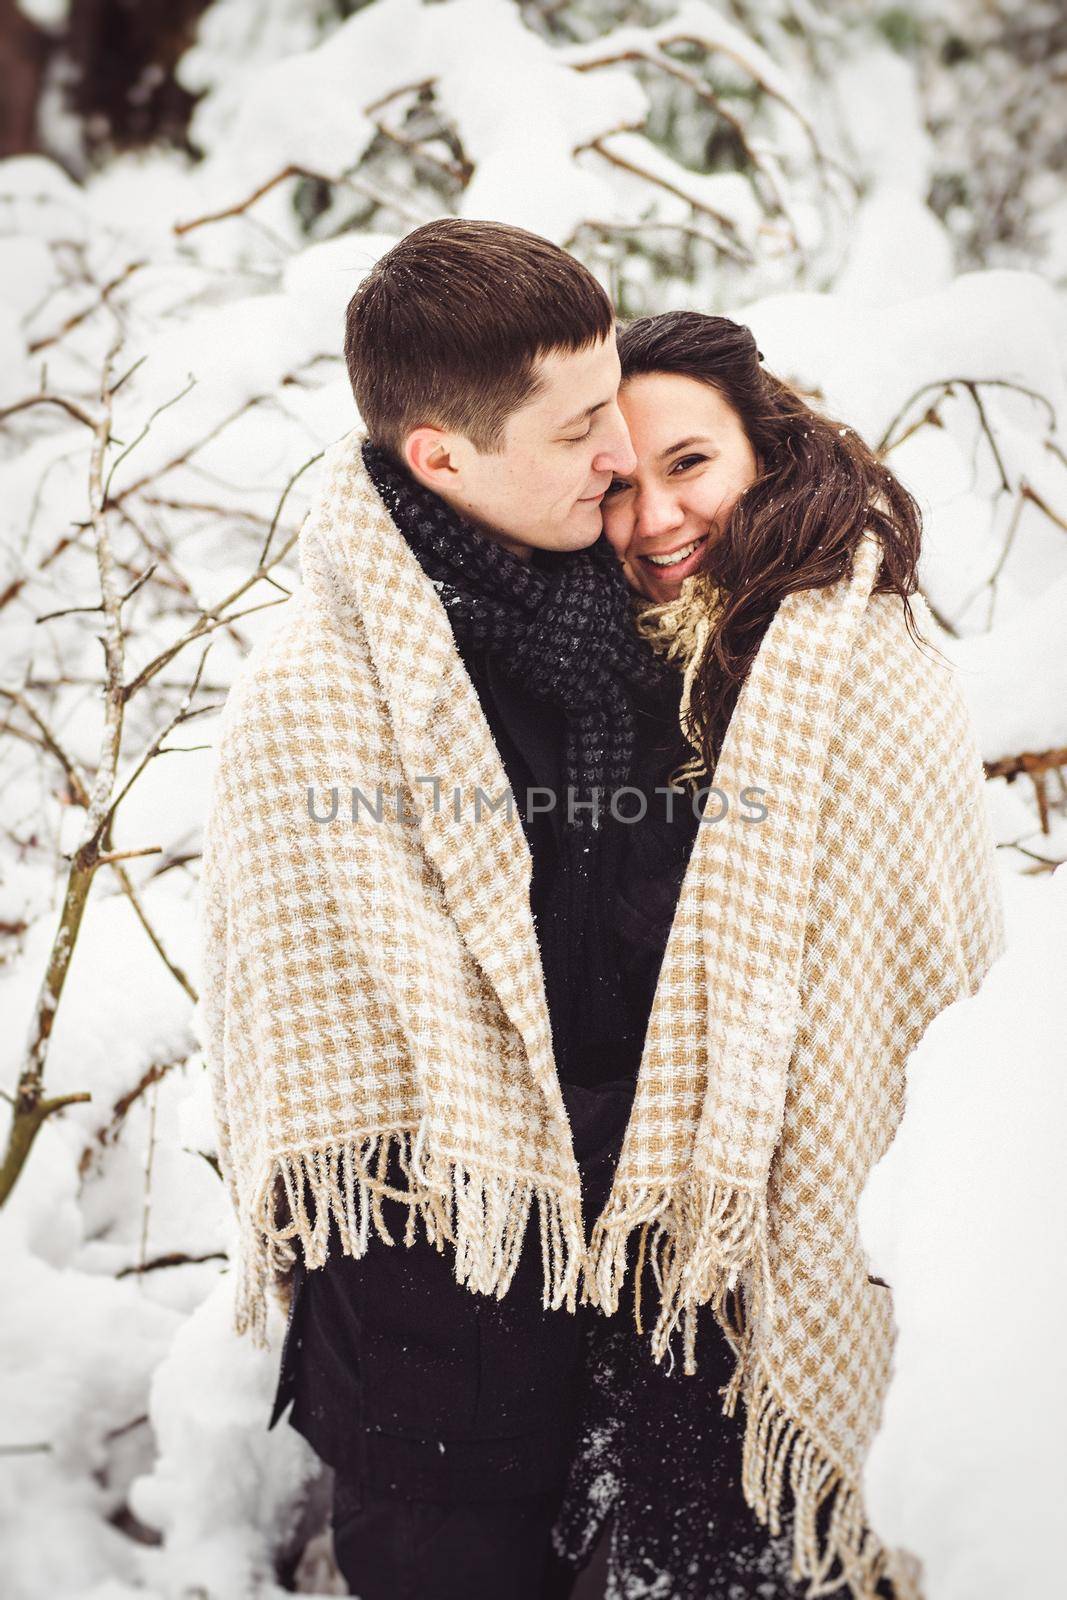 A guy and a girl in warm clothes and scarves on a walk in the snowy weather by Andreua